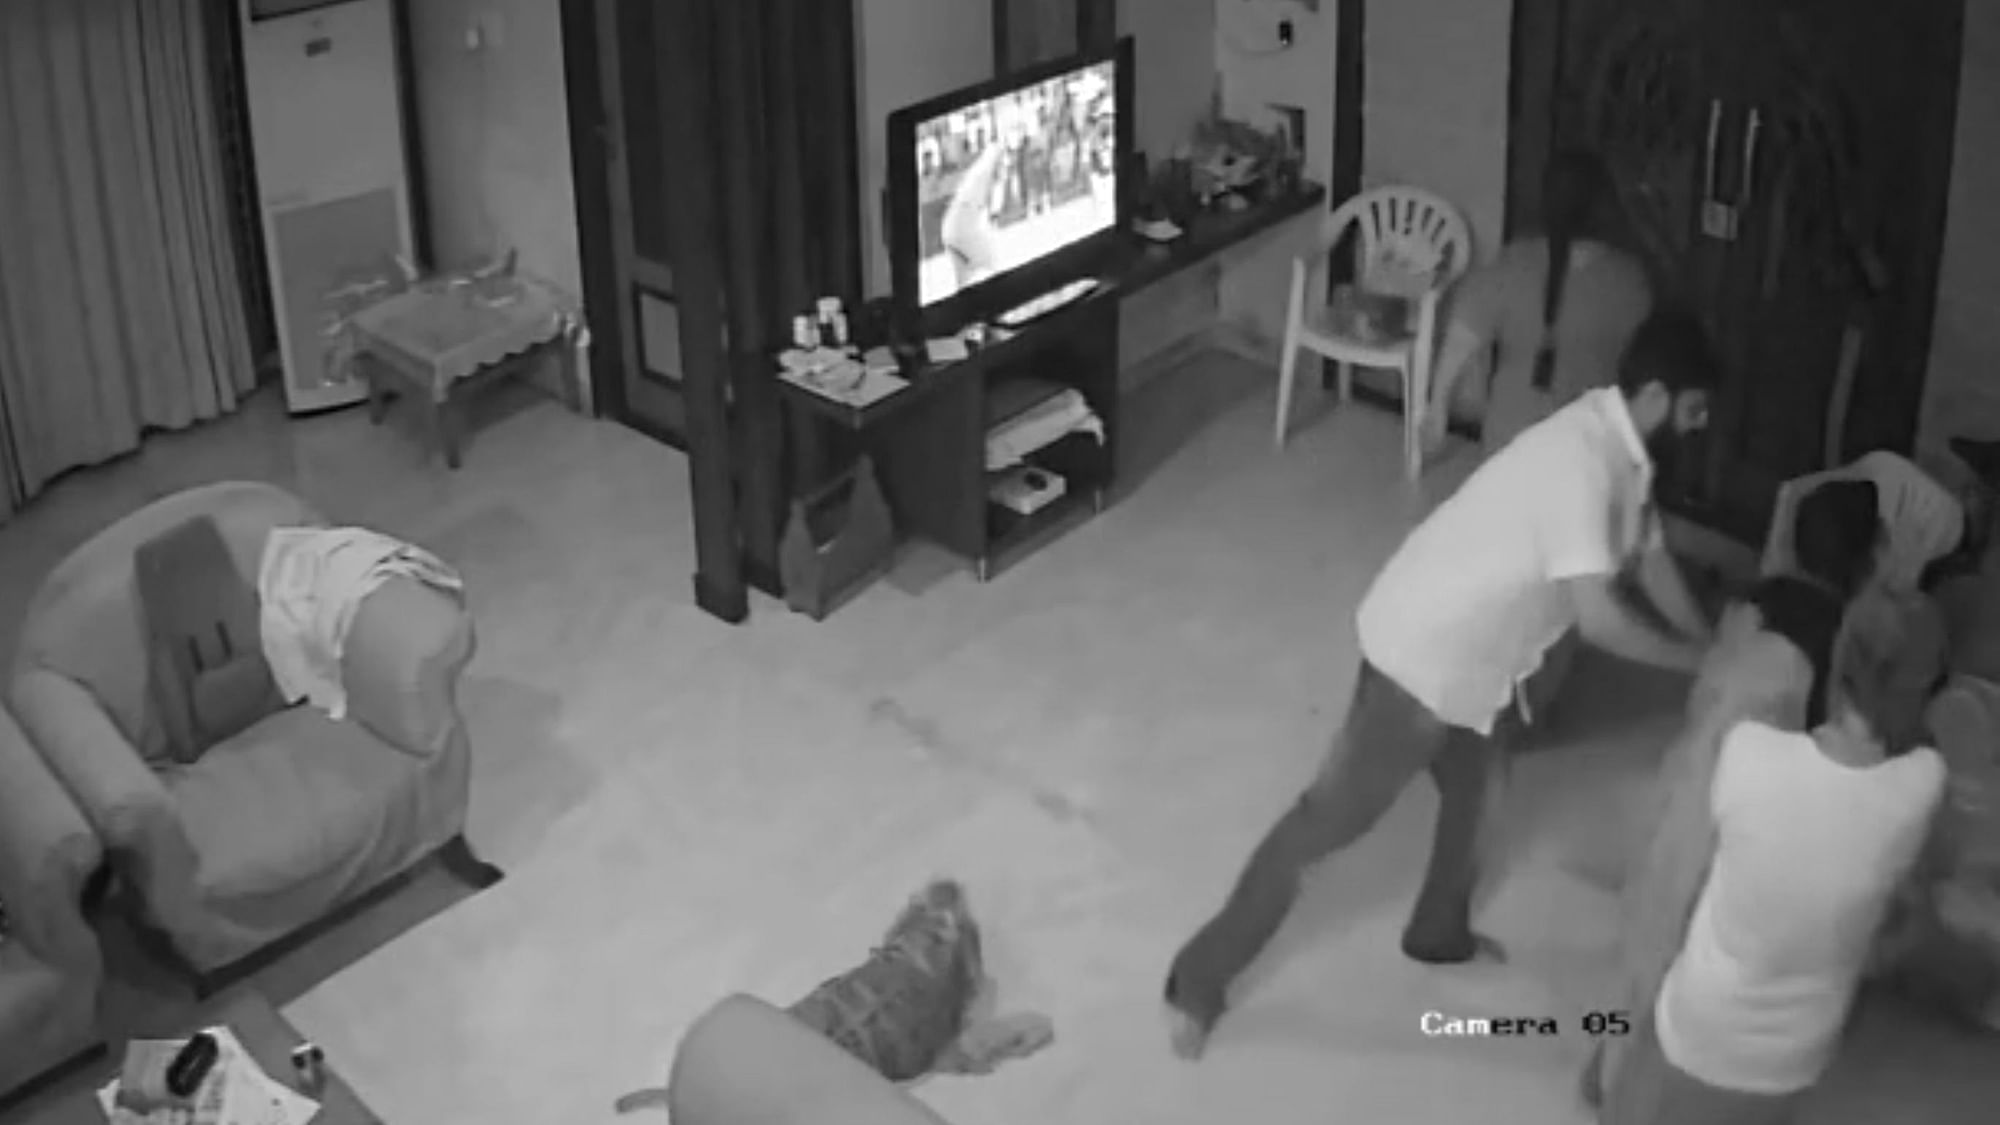 CCTV footage has been released showing a retired High Court judge, his wife and son physically abusing a woman as her two-year-old child tries hard to rescue her mother.